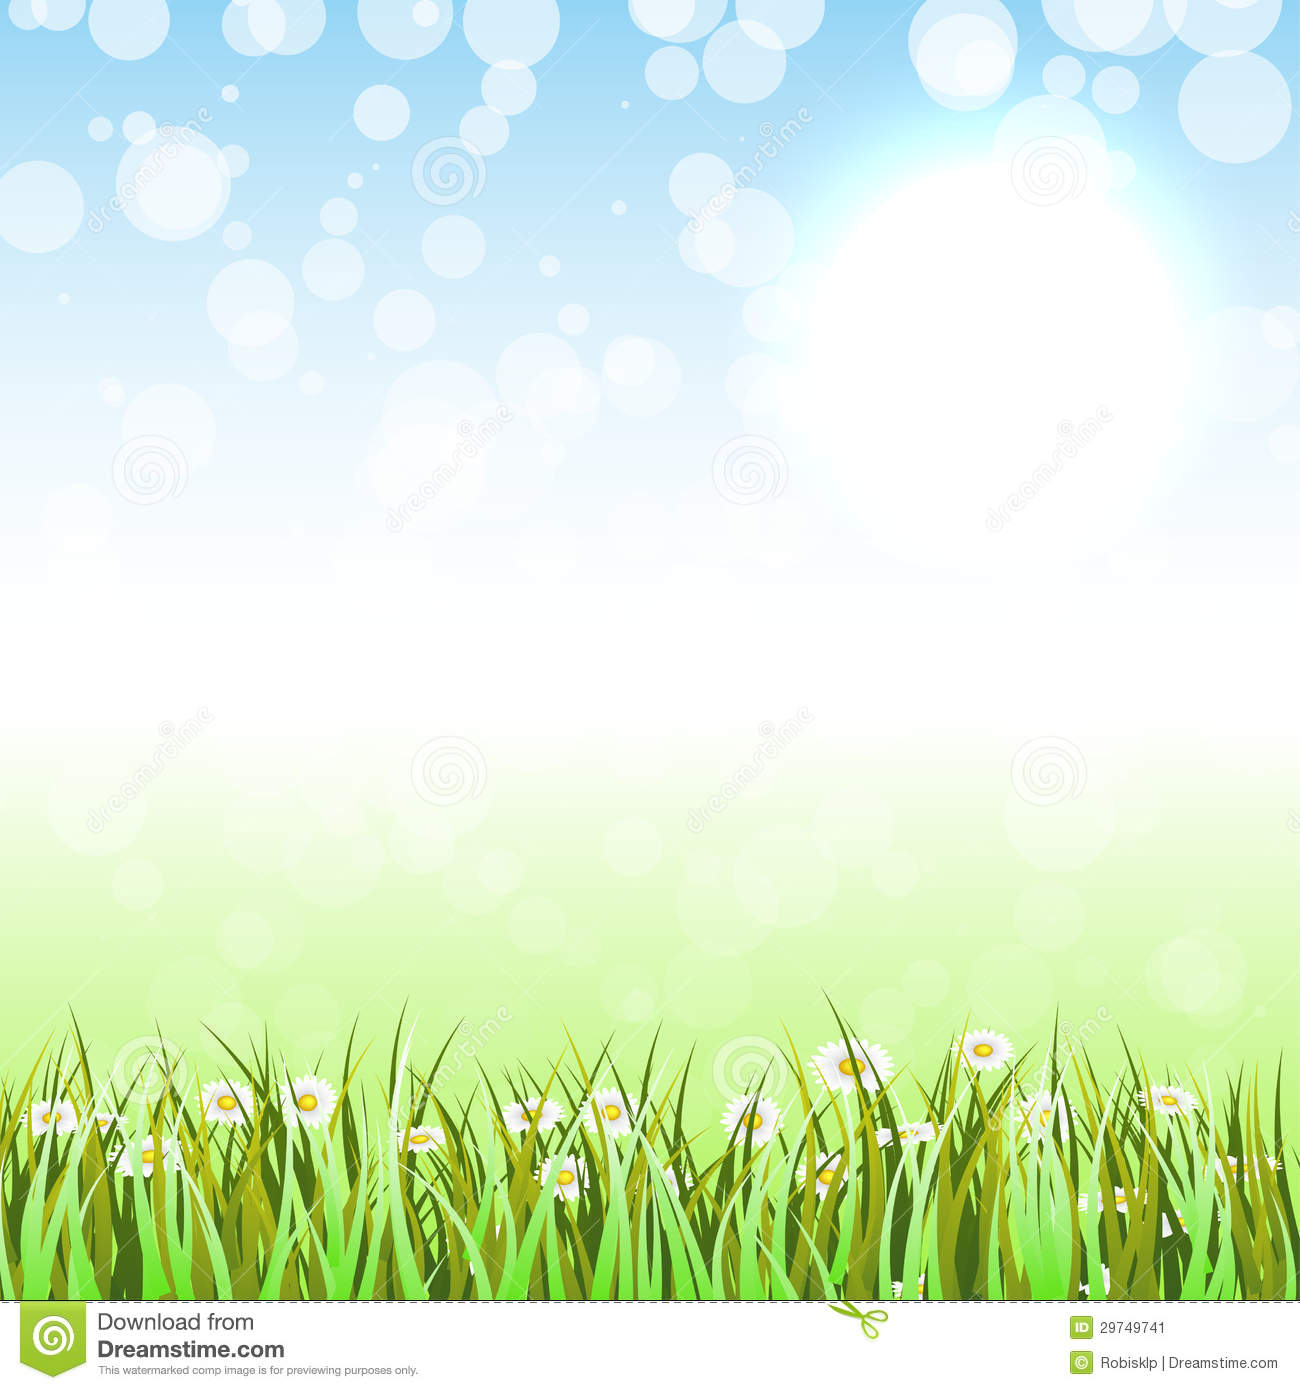 clipart background images - photo #22